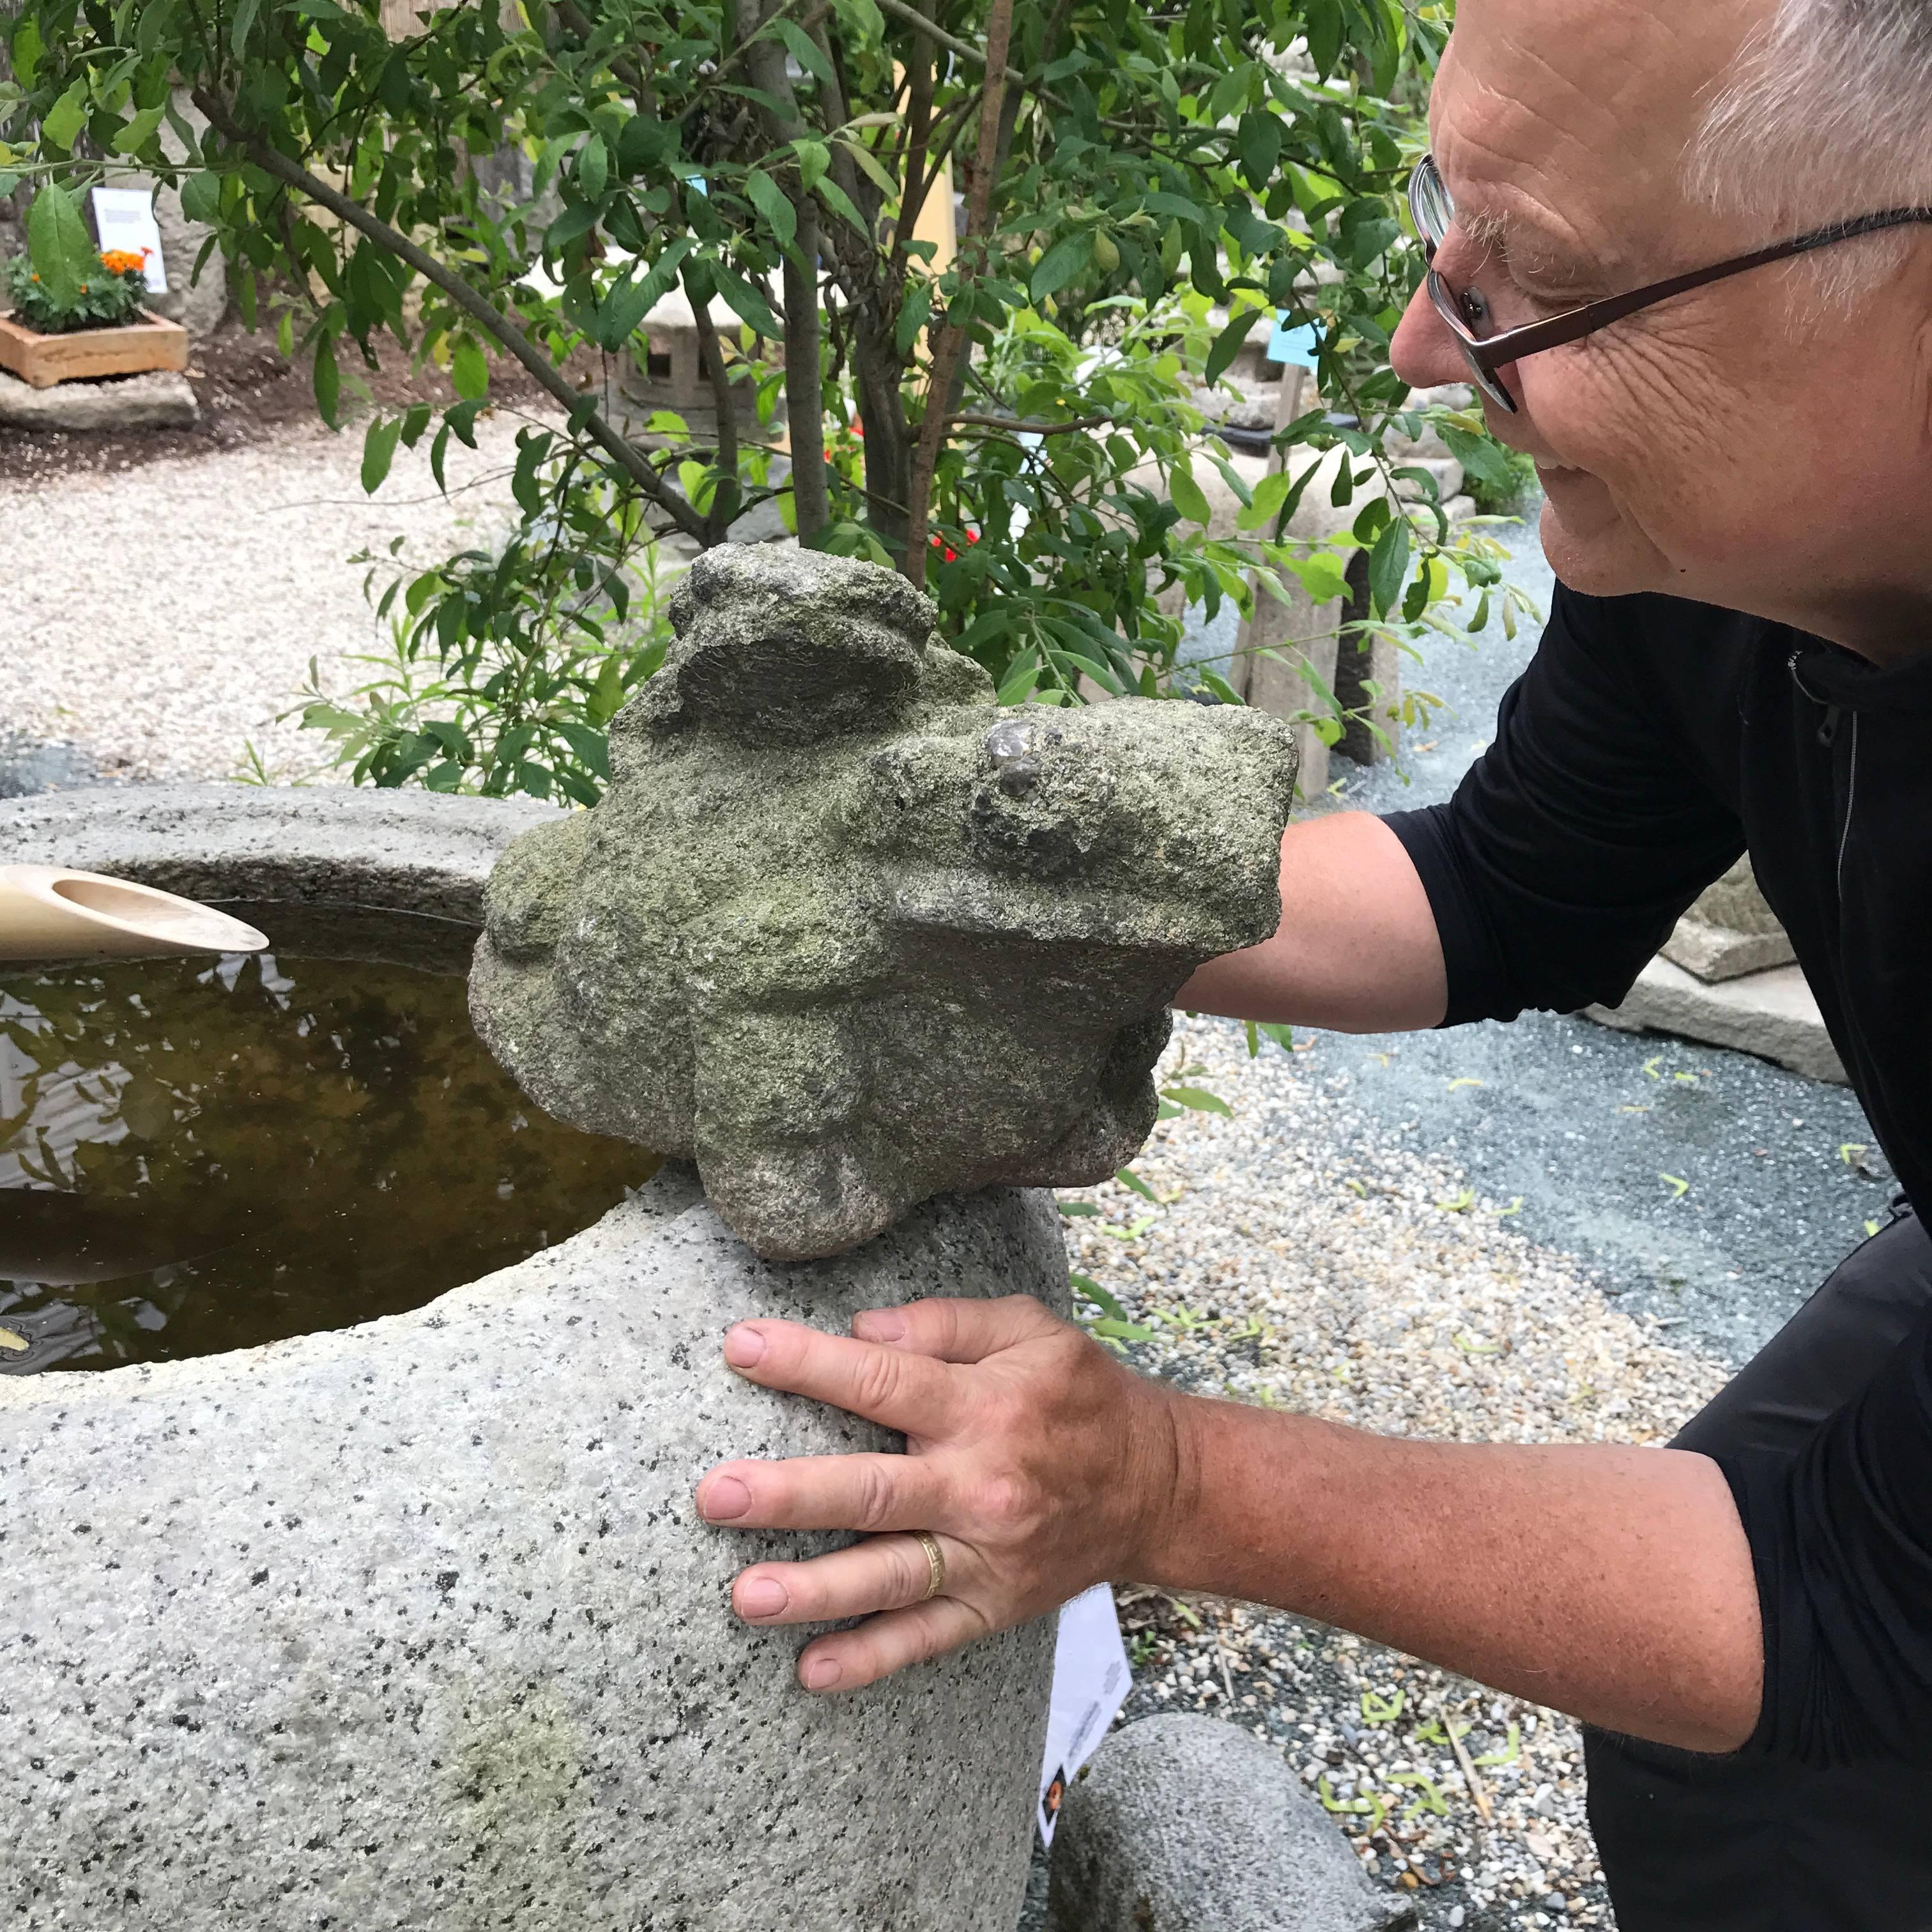 A delightful opportunity to acquire a rare Japanese hand-carved stone frog and baby frog sculpture fresh from an old Nagoya Japan garden and dating to the late 19th to early 20th century. Look at the superb carving detail on his surfaces - a master